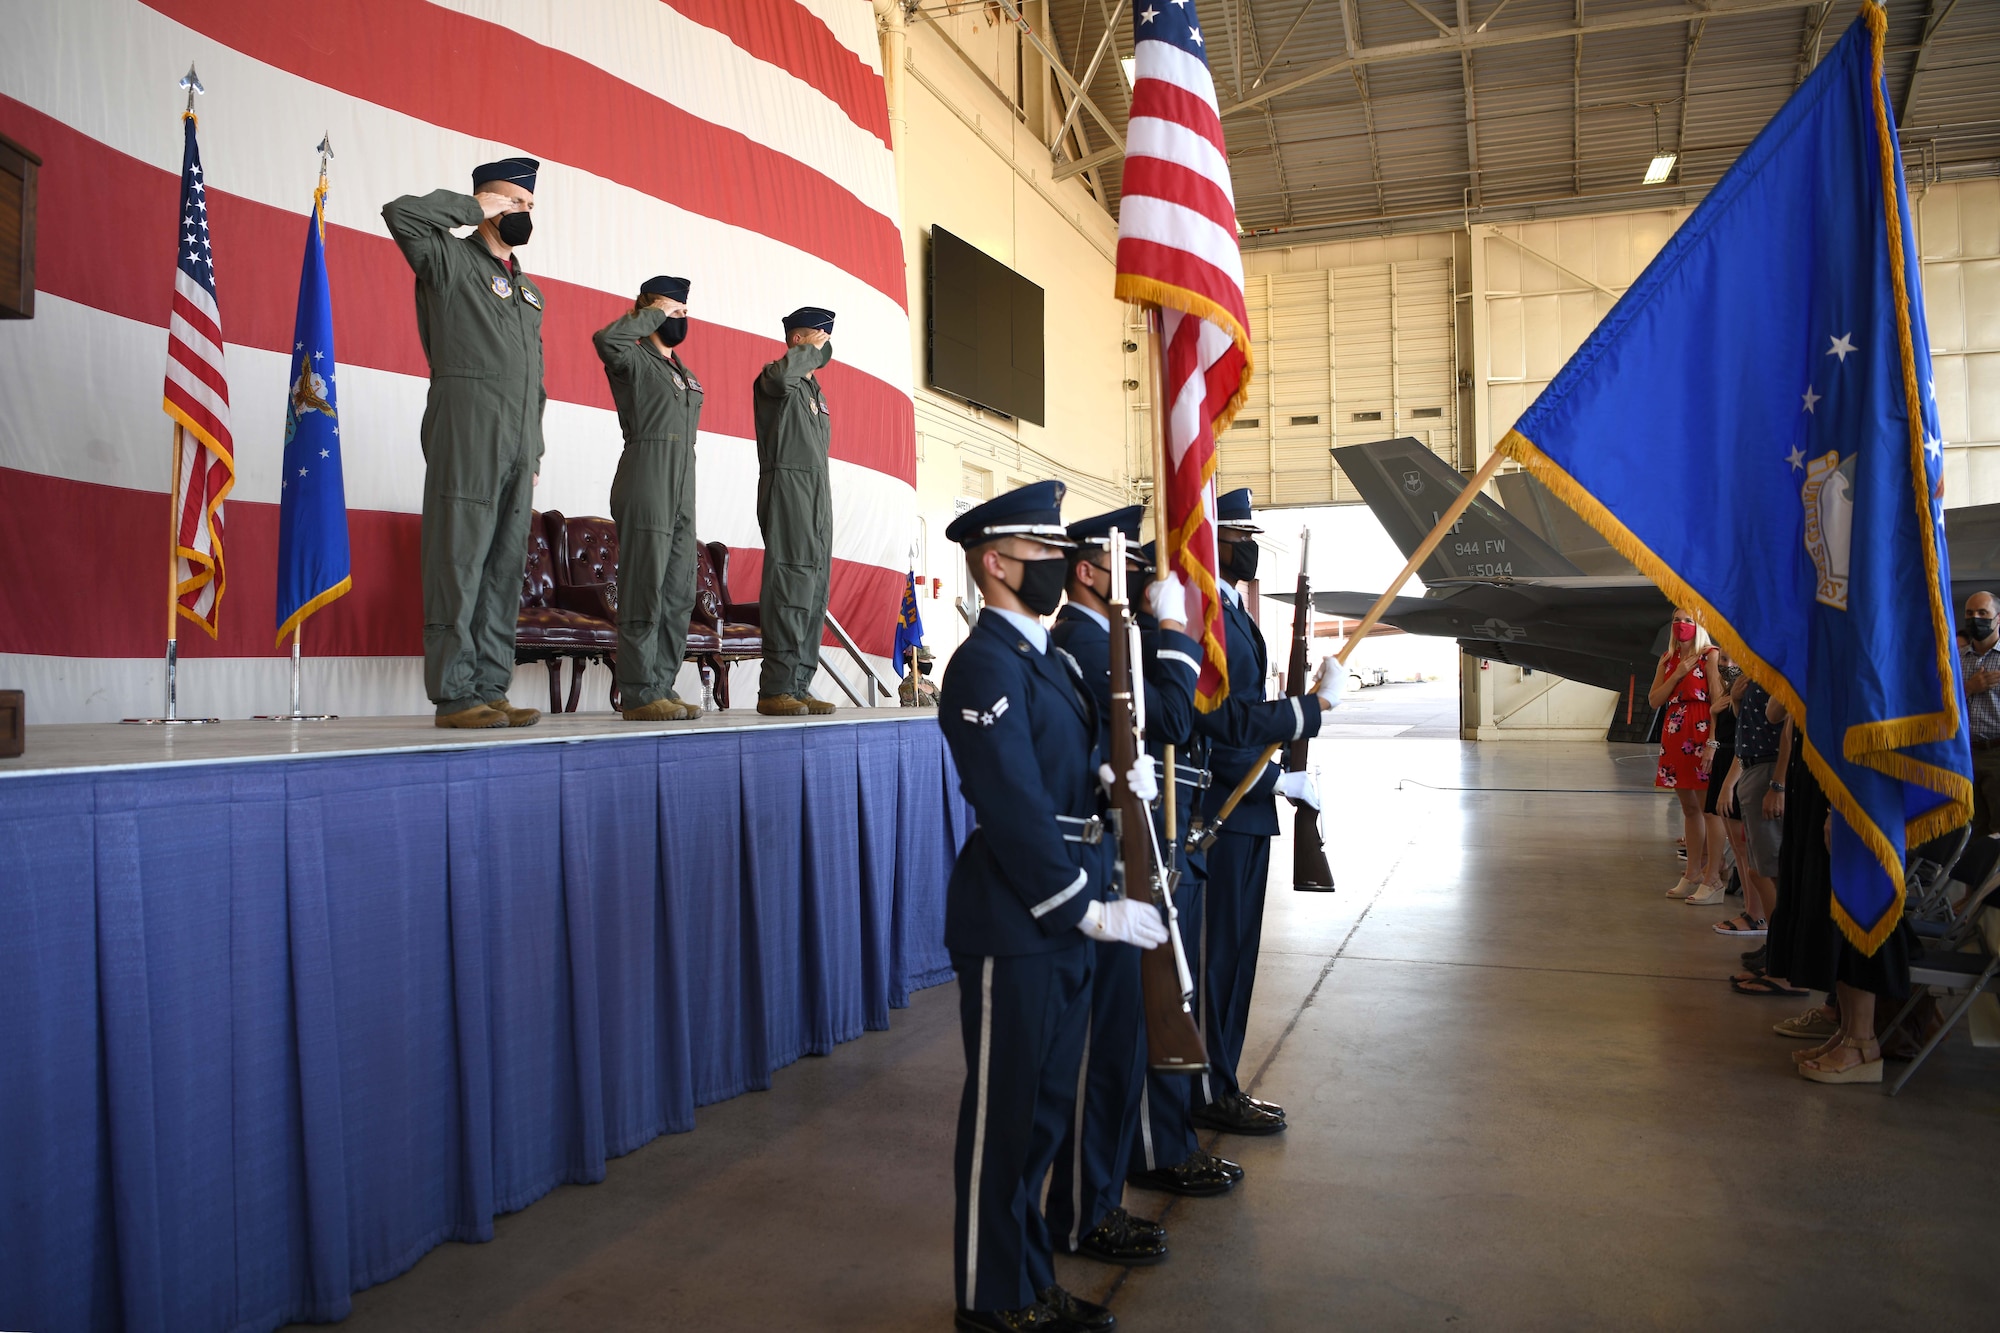 LUKE AIR FORCE BASE, ARIZ. – Honor guardsmen from the 56th Fighter Wing presents the colors during the 944th Operations Group change of command ceremony, August 6, 2021, at Luke Air Force Base, Arizona. In front of family, friends, and Airmen, Col. Mark Van Brunt, 944th Fighter Wing commander, relieved Reserve Citizen Airman Col. Trena Savageau, 944th OG commander of command and presented it to Col. Brett Comer, incoming commander. (U.S. Air Force Photo/Tech. Sgt. Courtney Richardson)